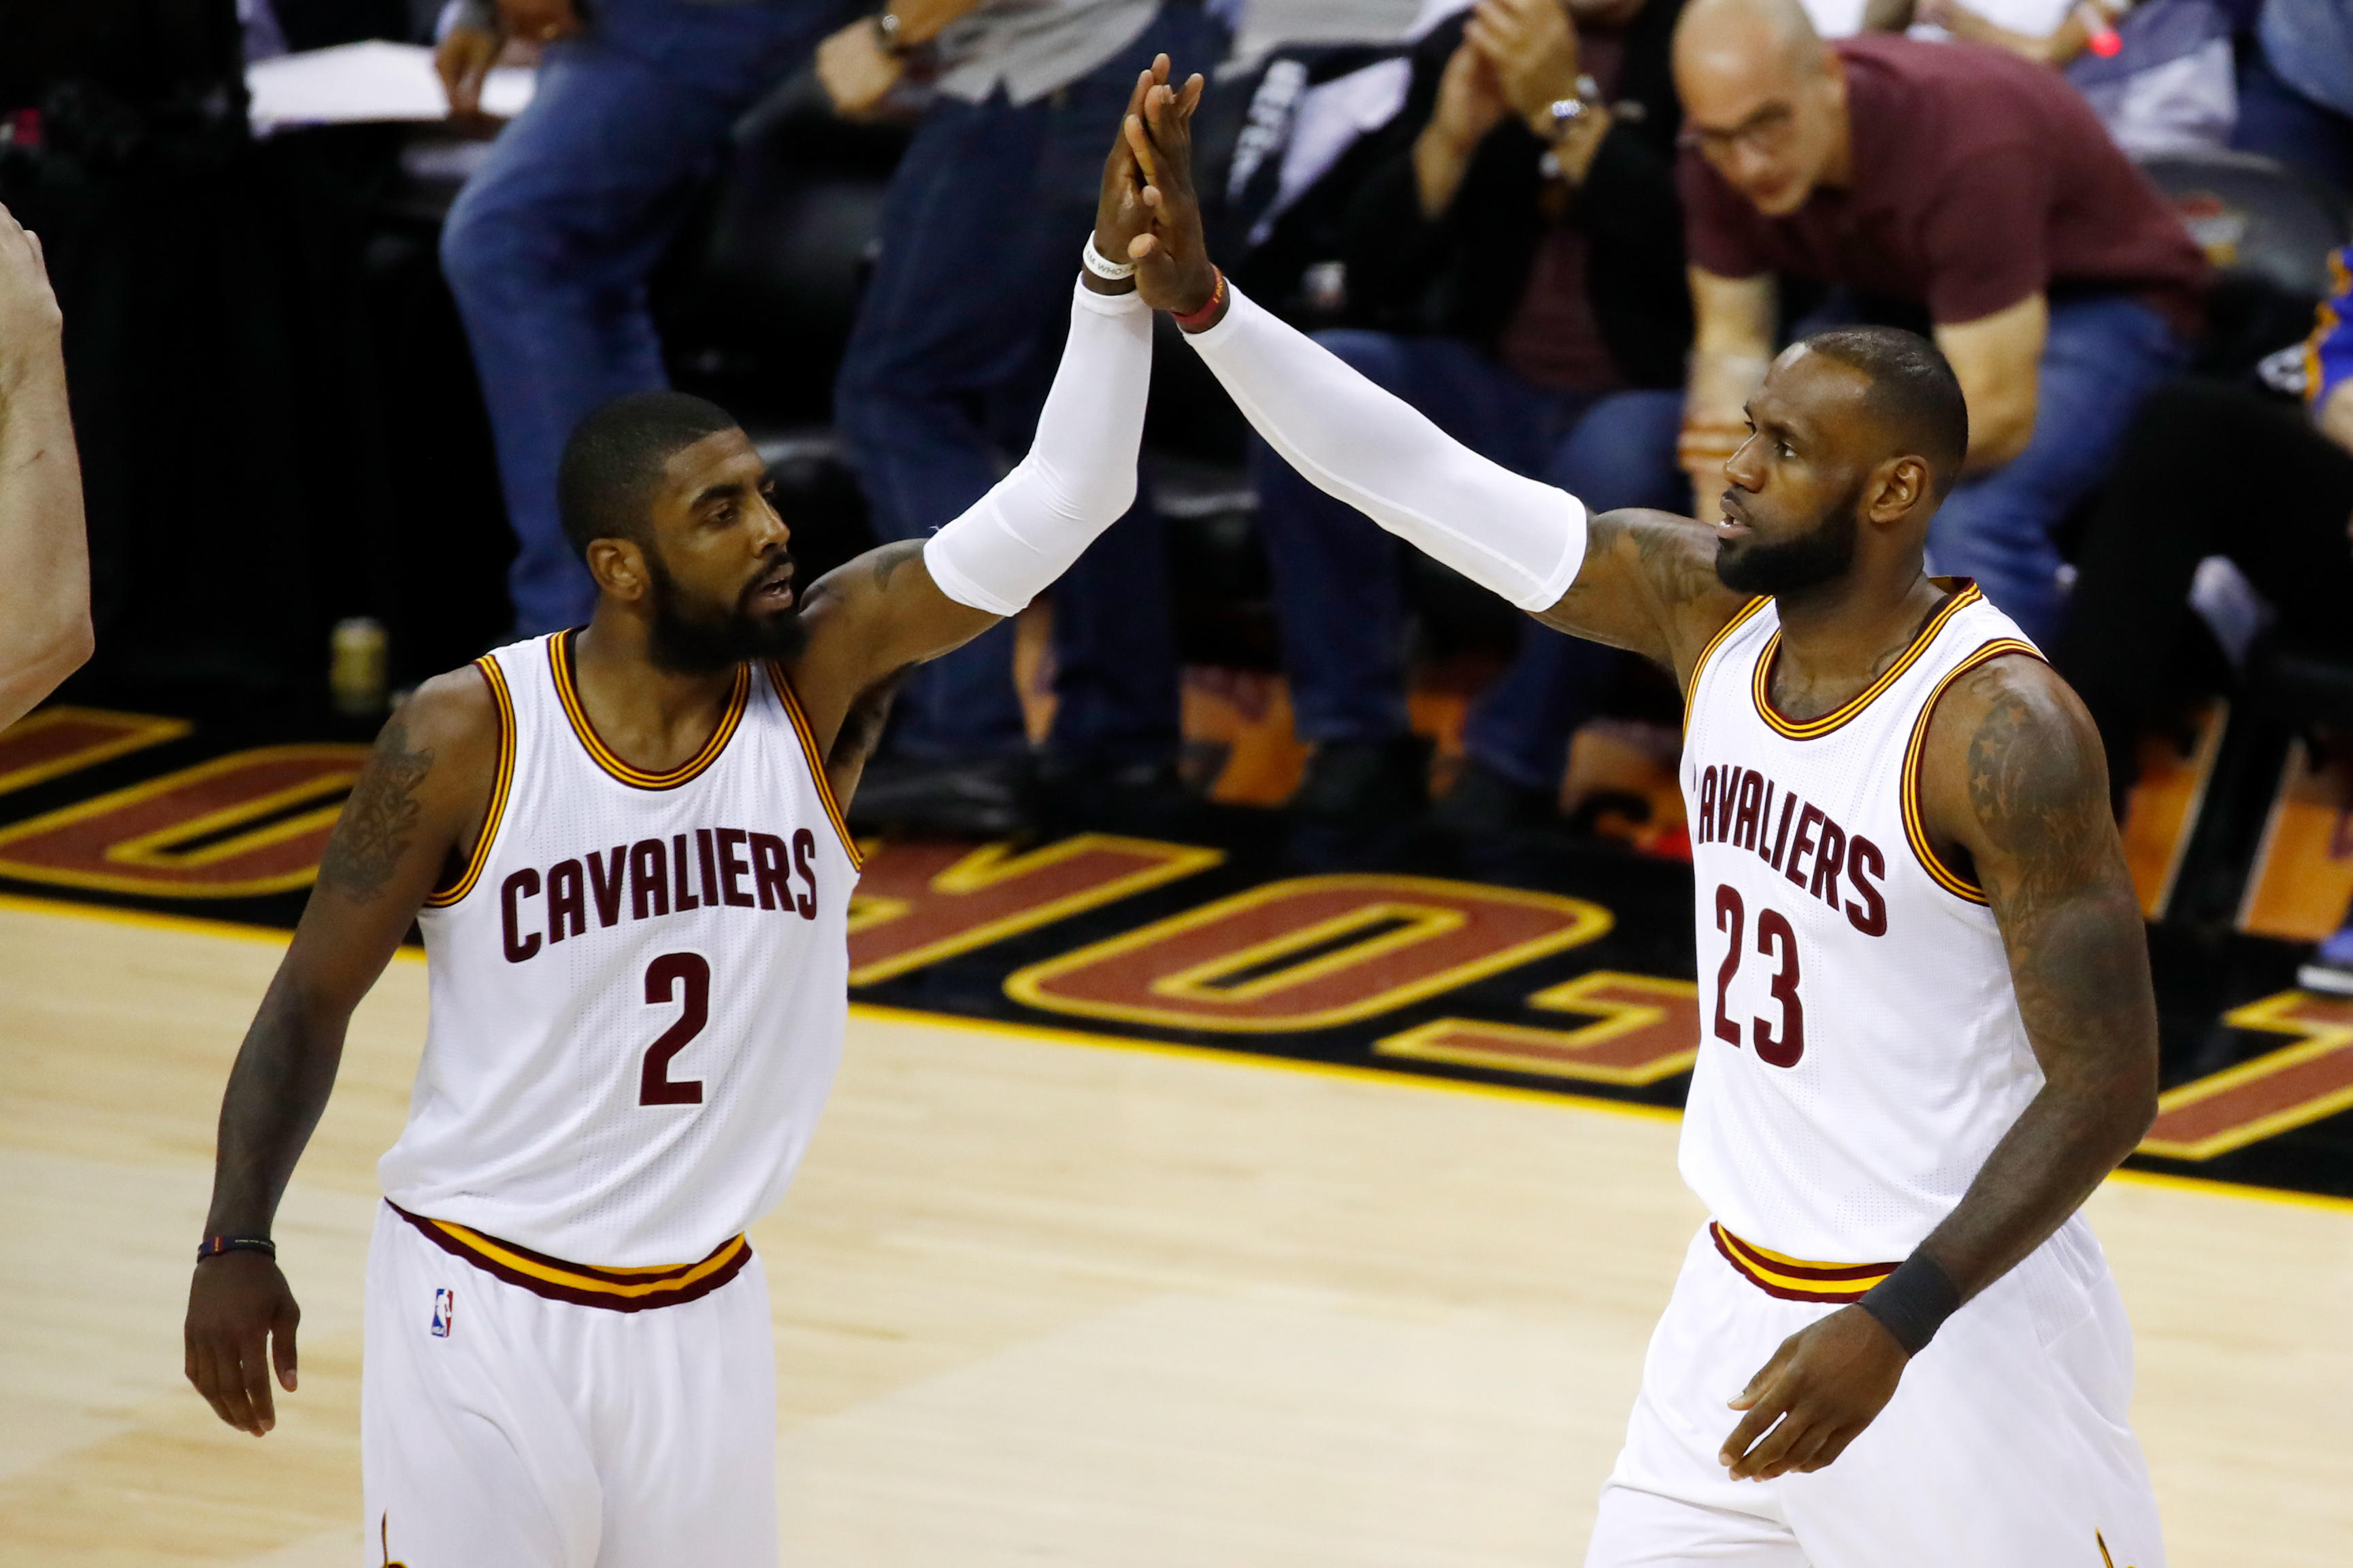 NBA Rumors: Cavaliers' Kyrie Irving could make quick decision in